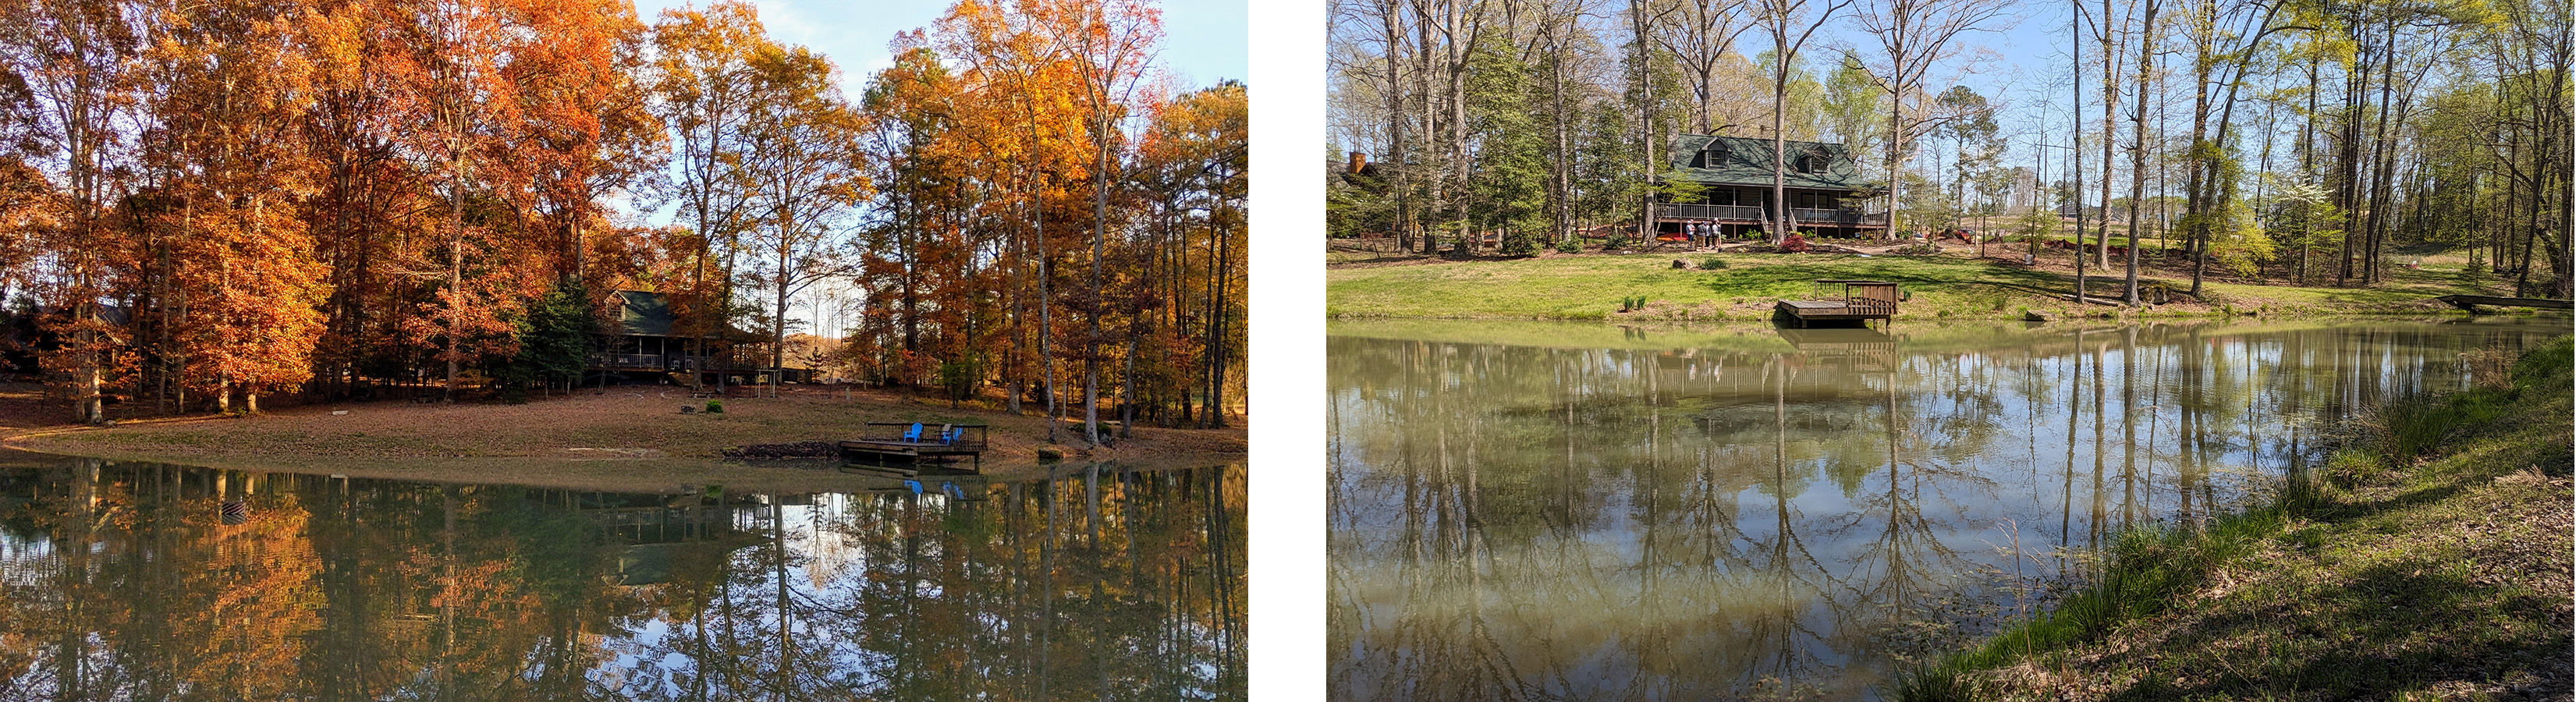 two images of the same pond with a house in the background. The first with vivid fall colors and the second in spring with vibrant new green growth on the trees. 